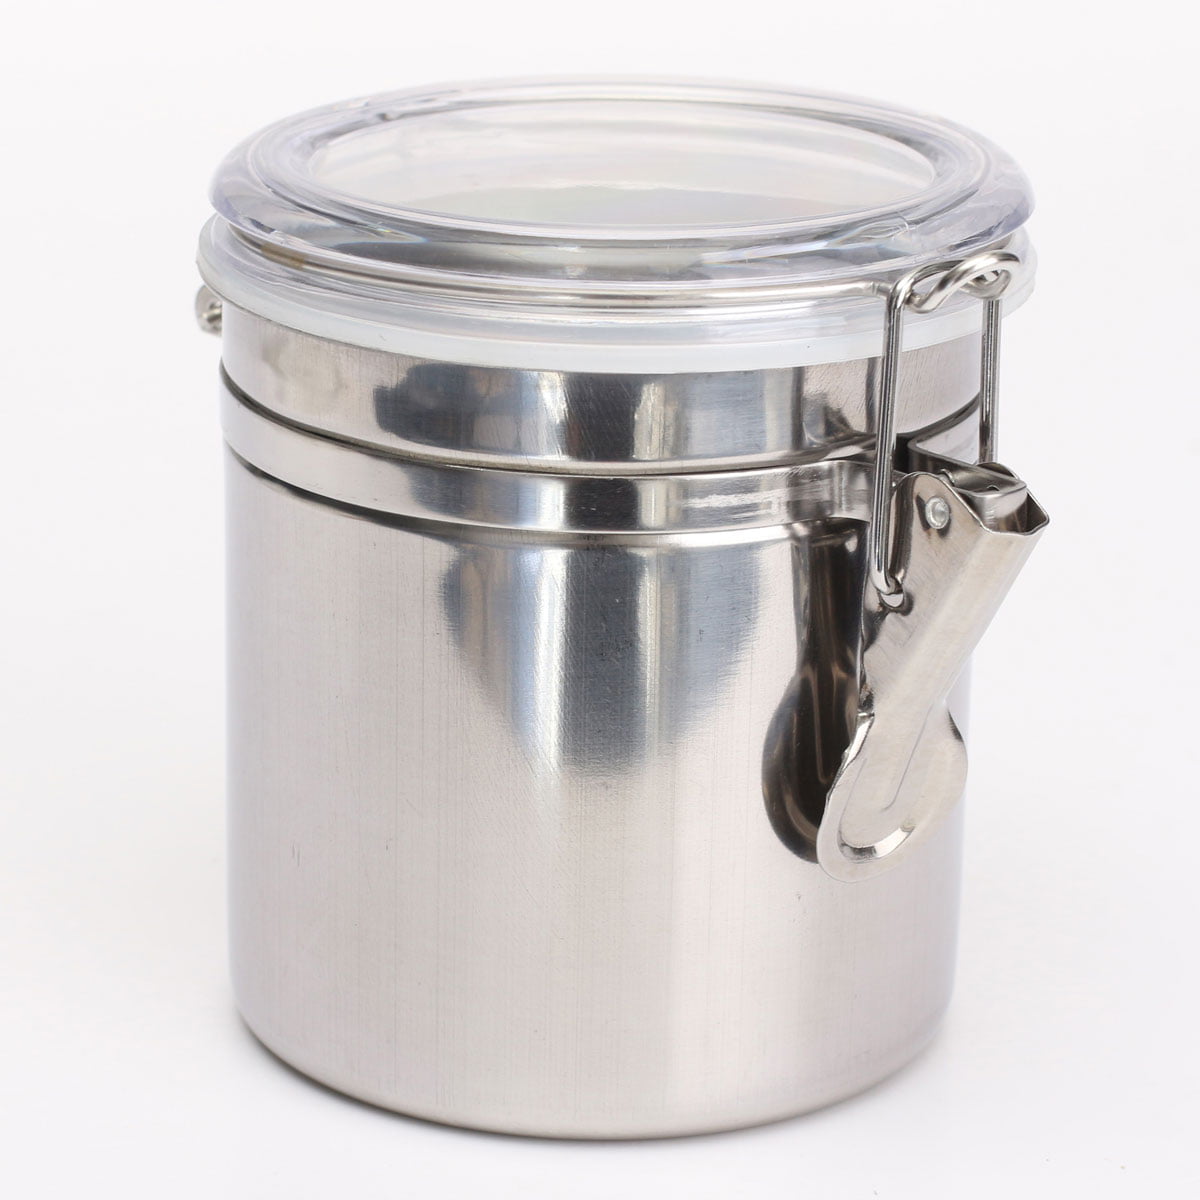 New Stainless Steel Airtight Sealed Canister Coffee Flour Sugar Tea Container US